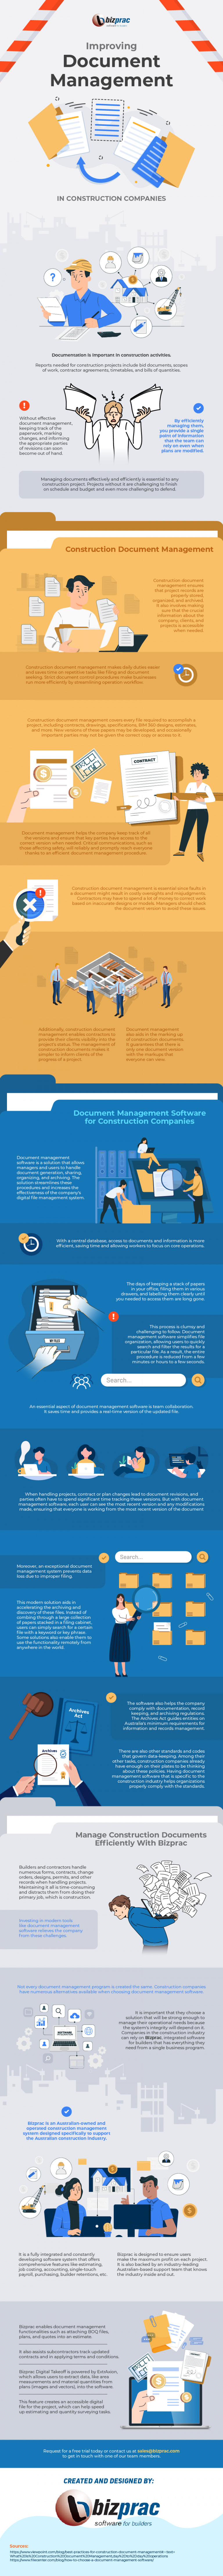 Improving_Document_Management_in_Construction_Companies_infographic_image
